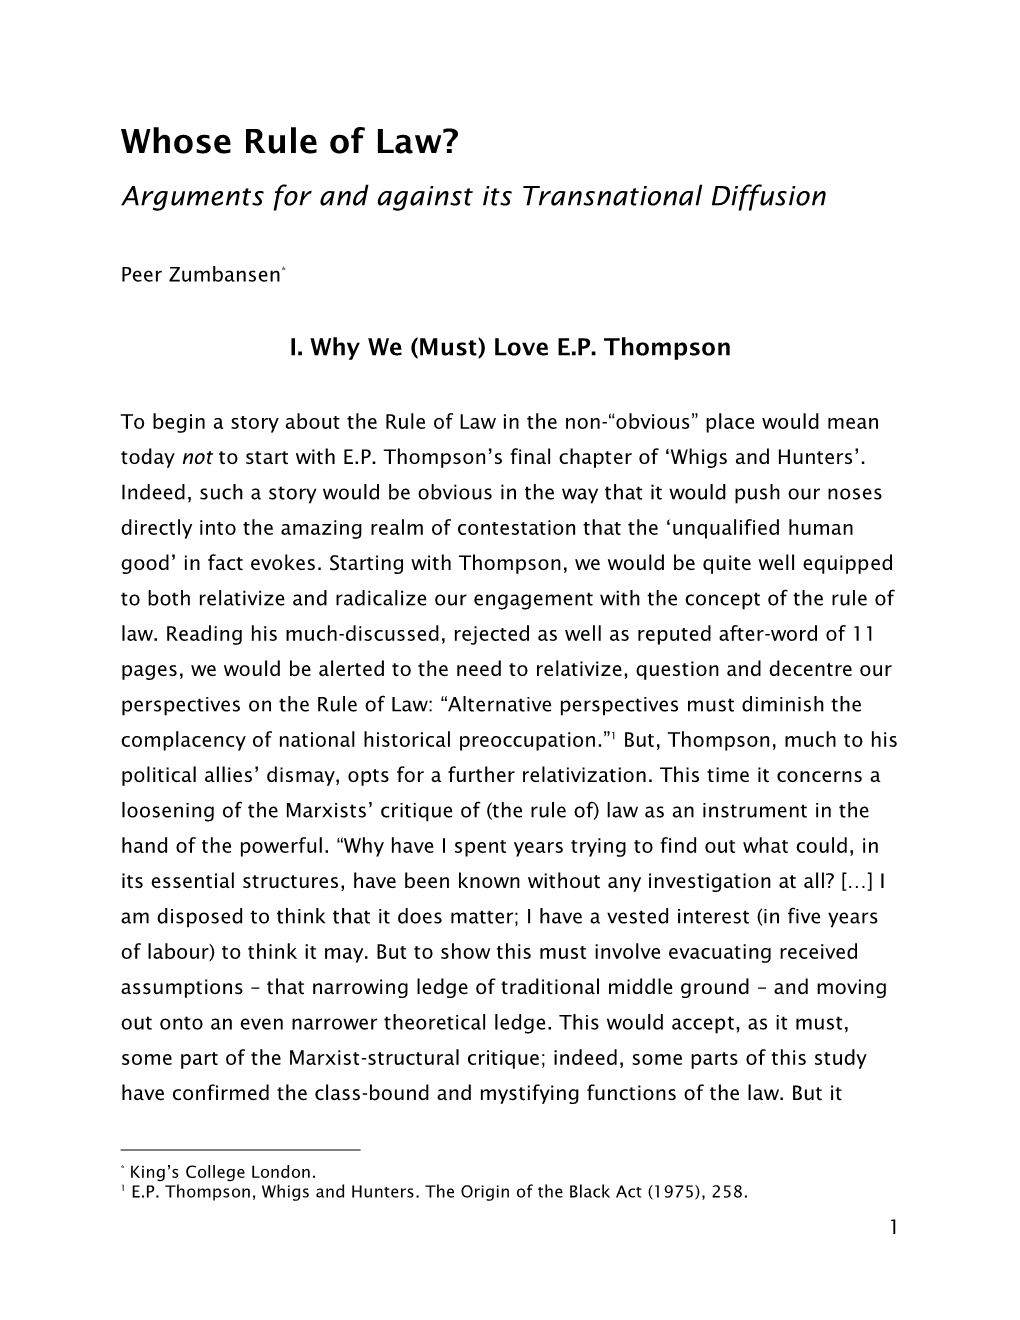 Whose Rule of Law? Arguments for and Against Its Transnational Diffusion